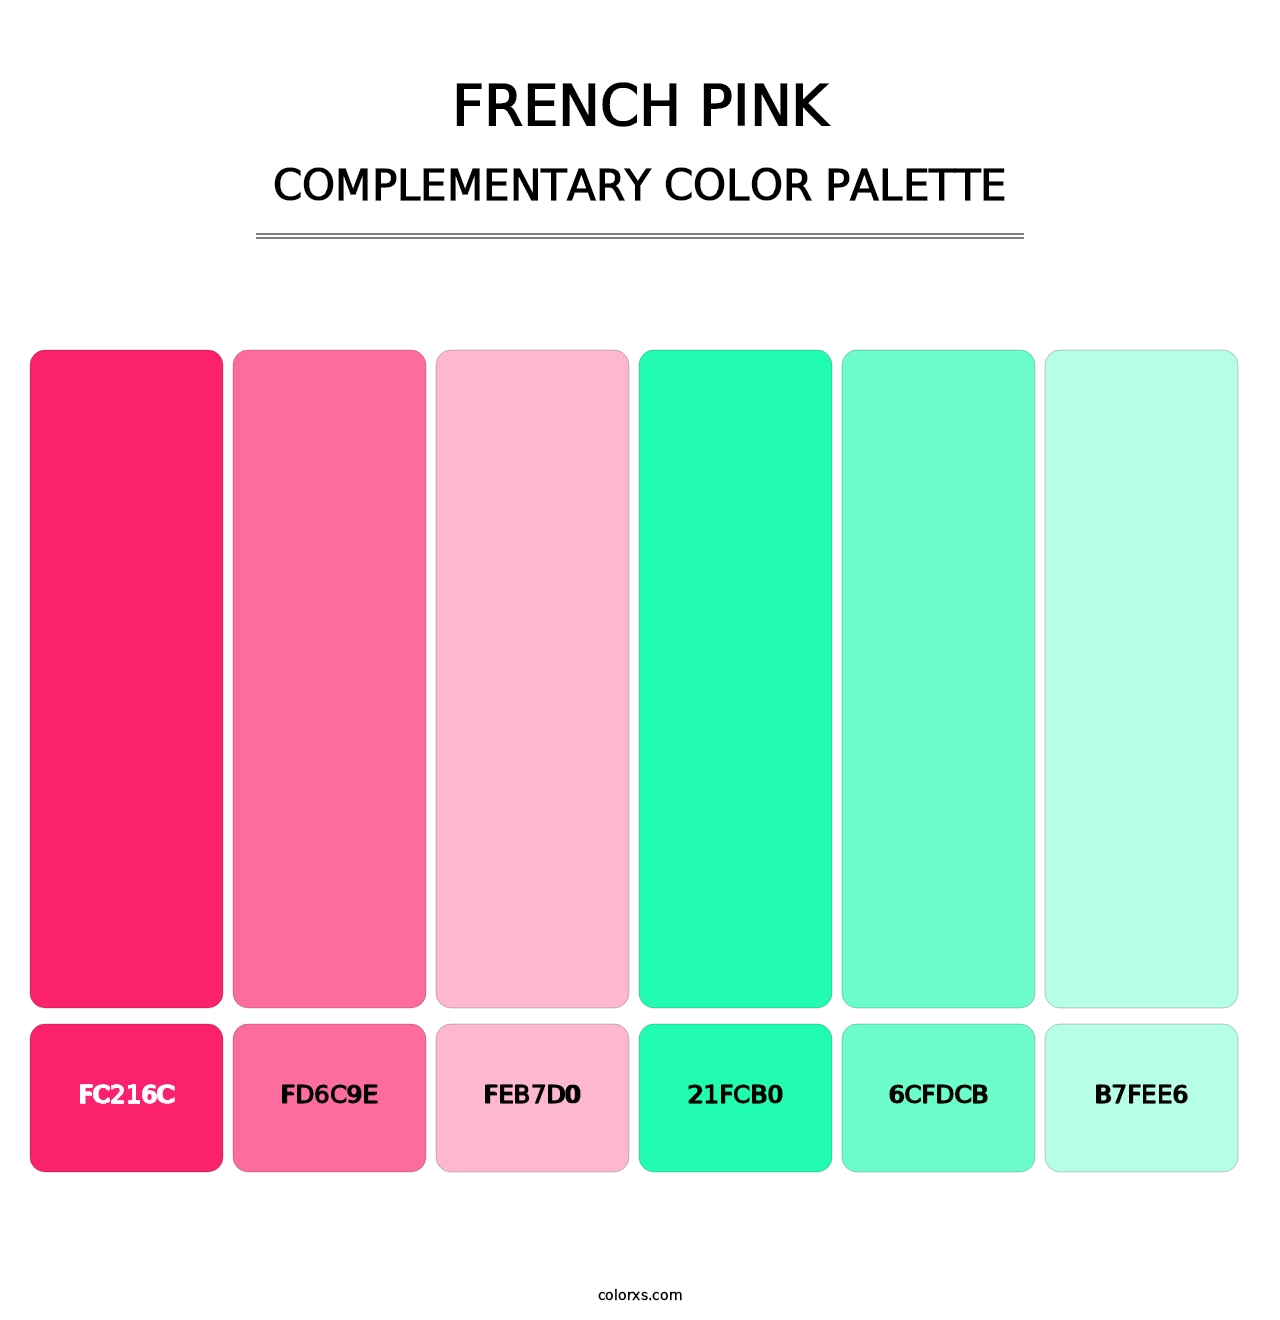 French Pink - Complementary Color Palette